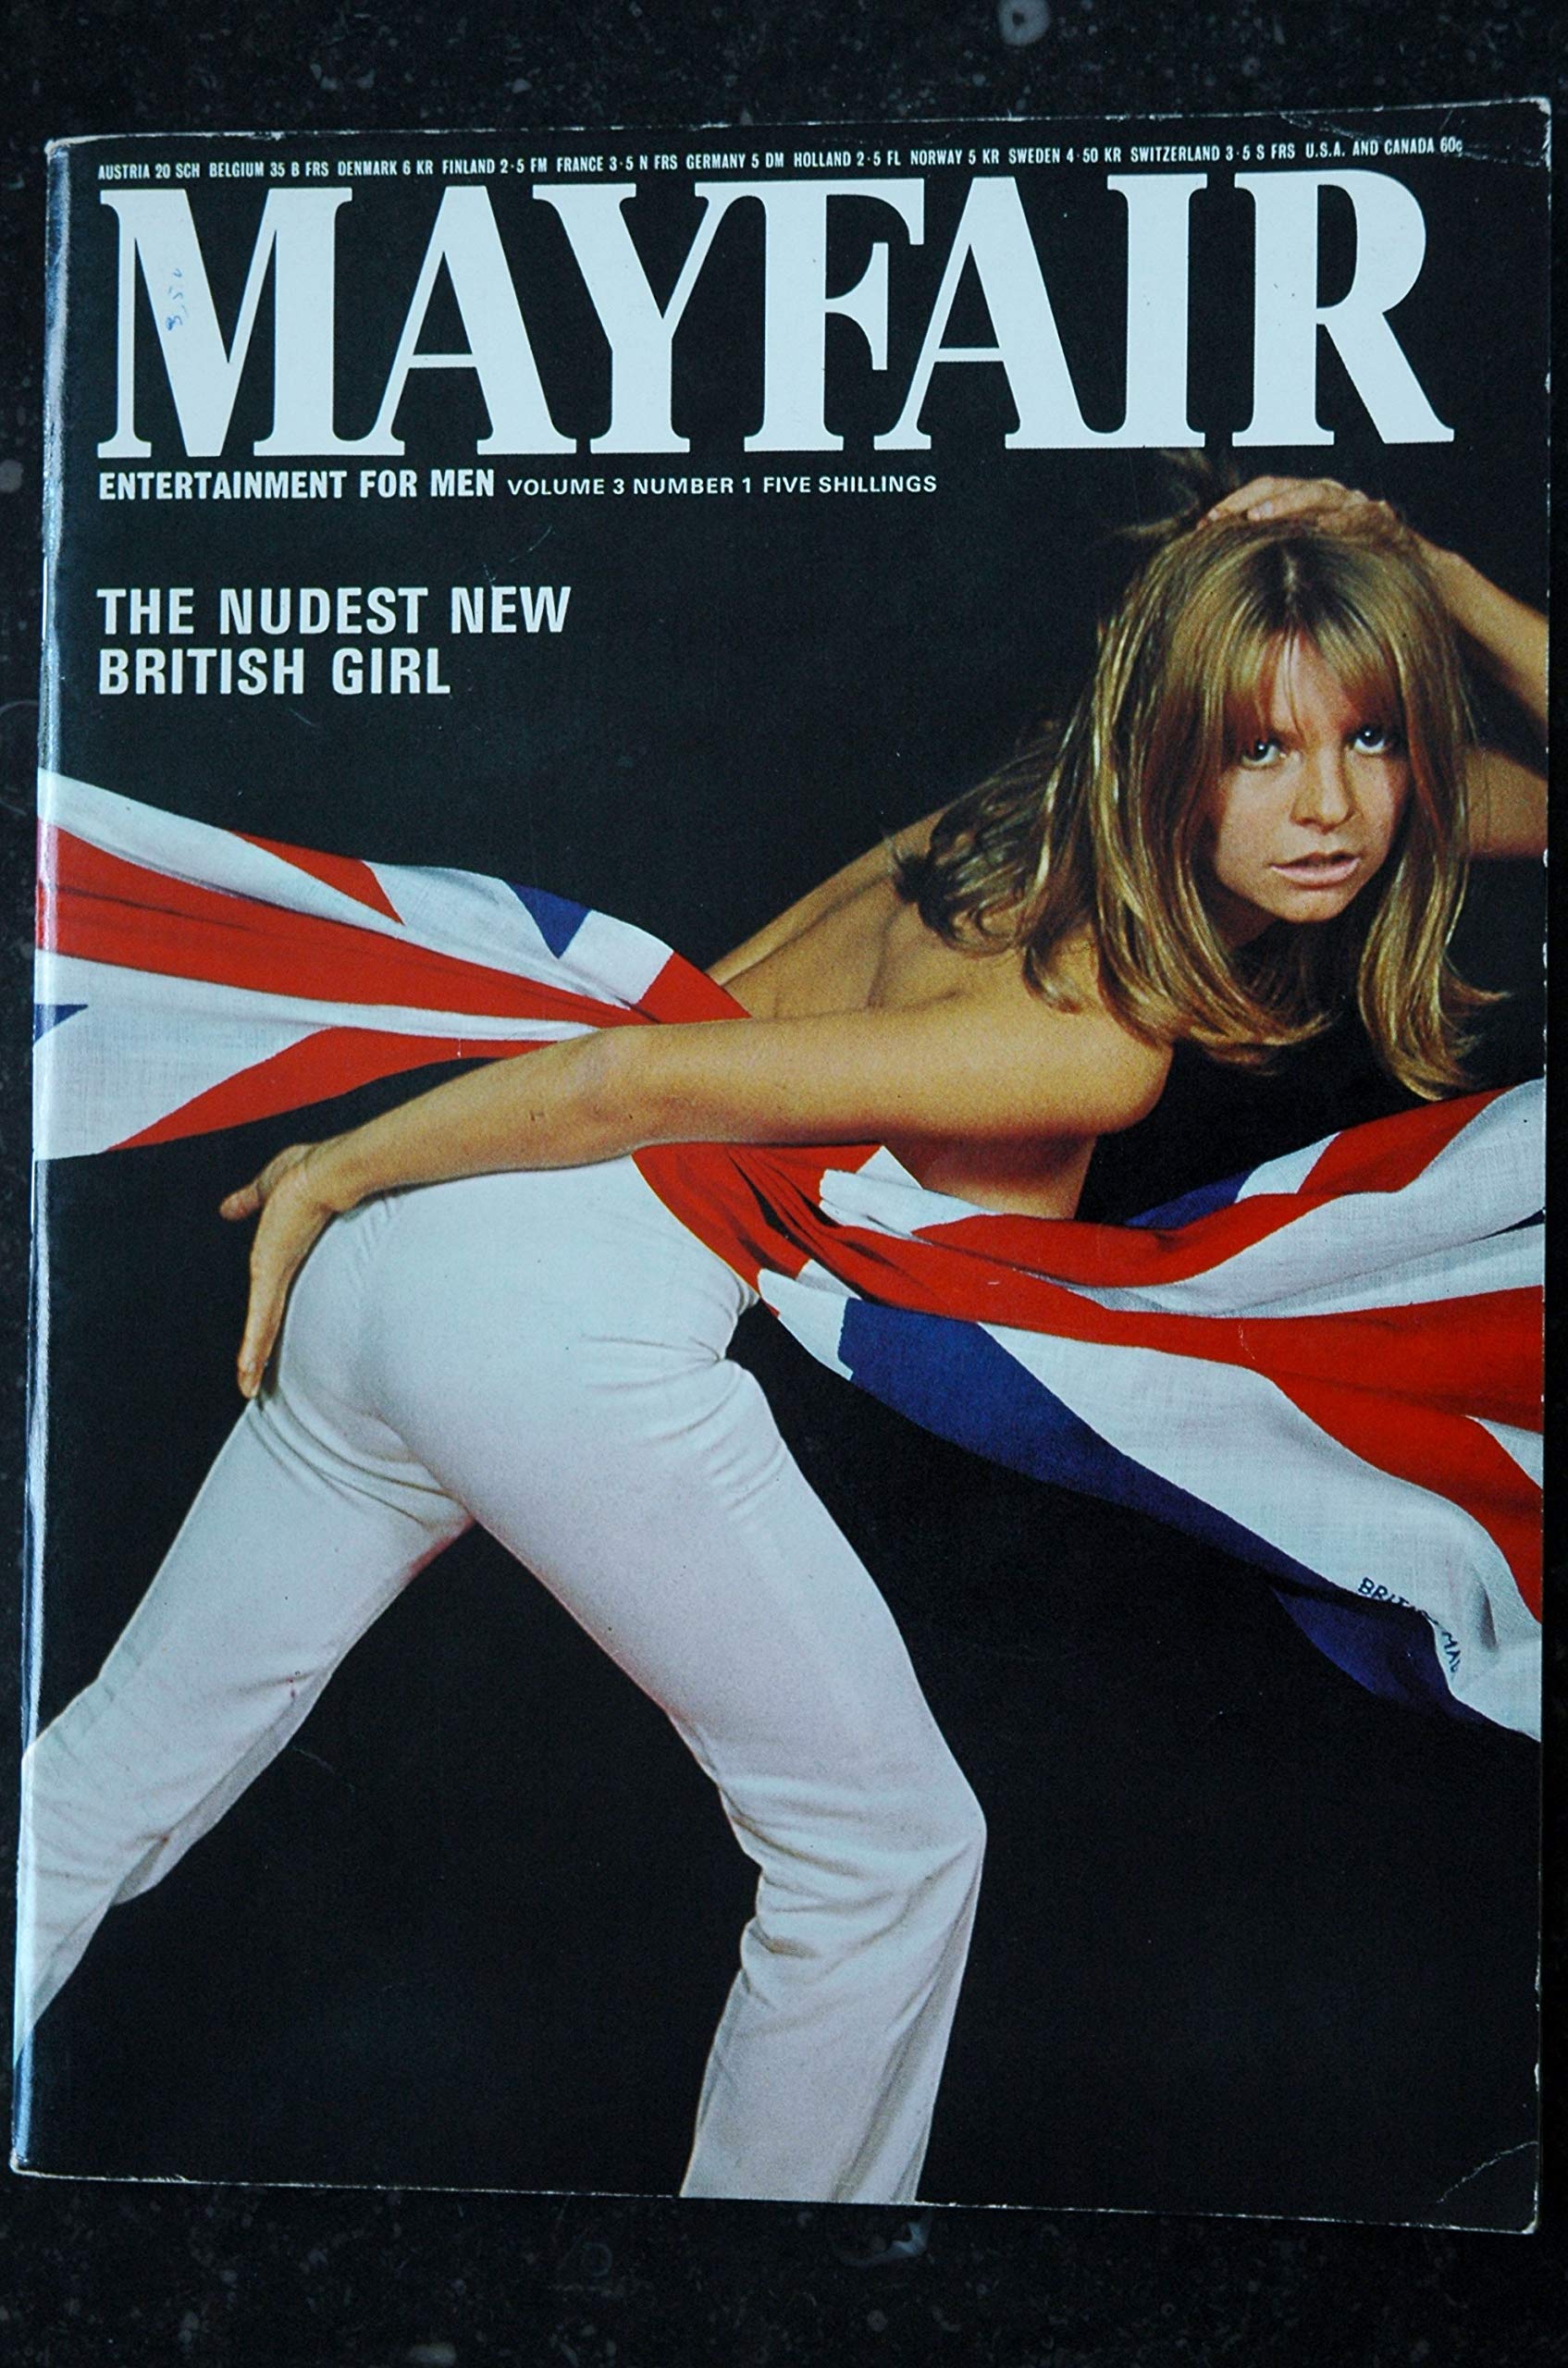 Mayfair Vol. 3 # 1 magazine back issue Mayfair magizine back copy Mayfair Vol. 3 # 1 Vintage Adult Magazine Back Issue Published by Paul Raymond Publishing Group. Entertainment For Men .